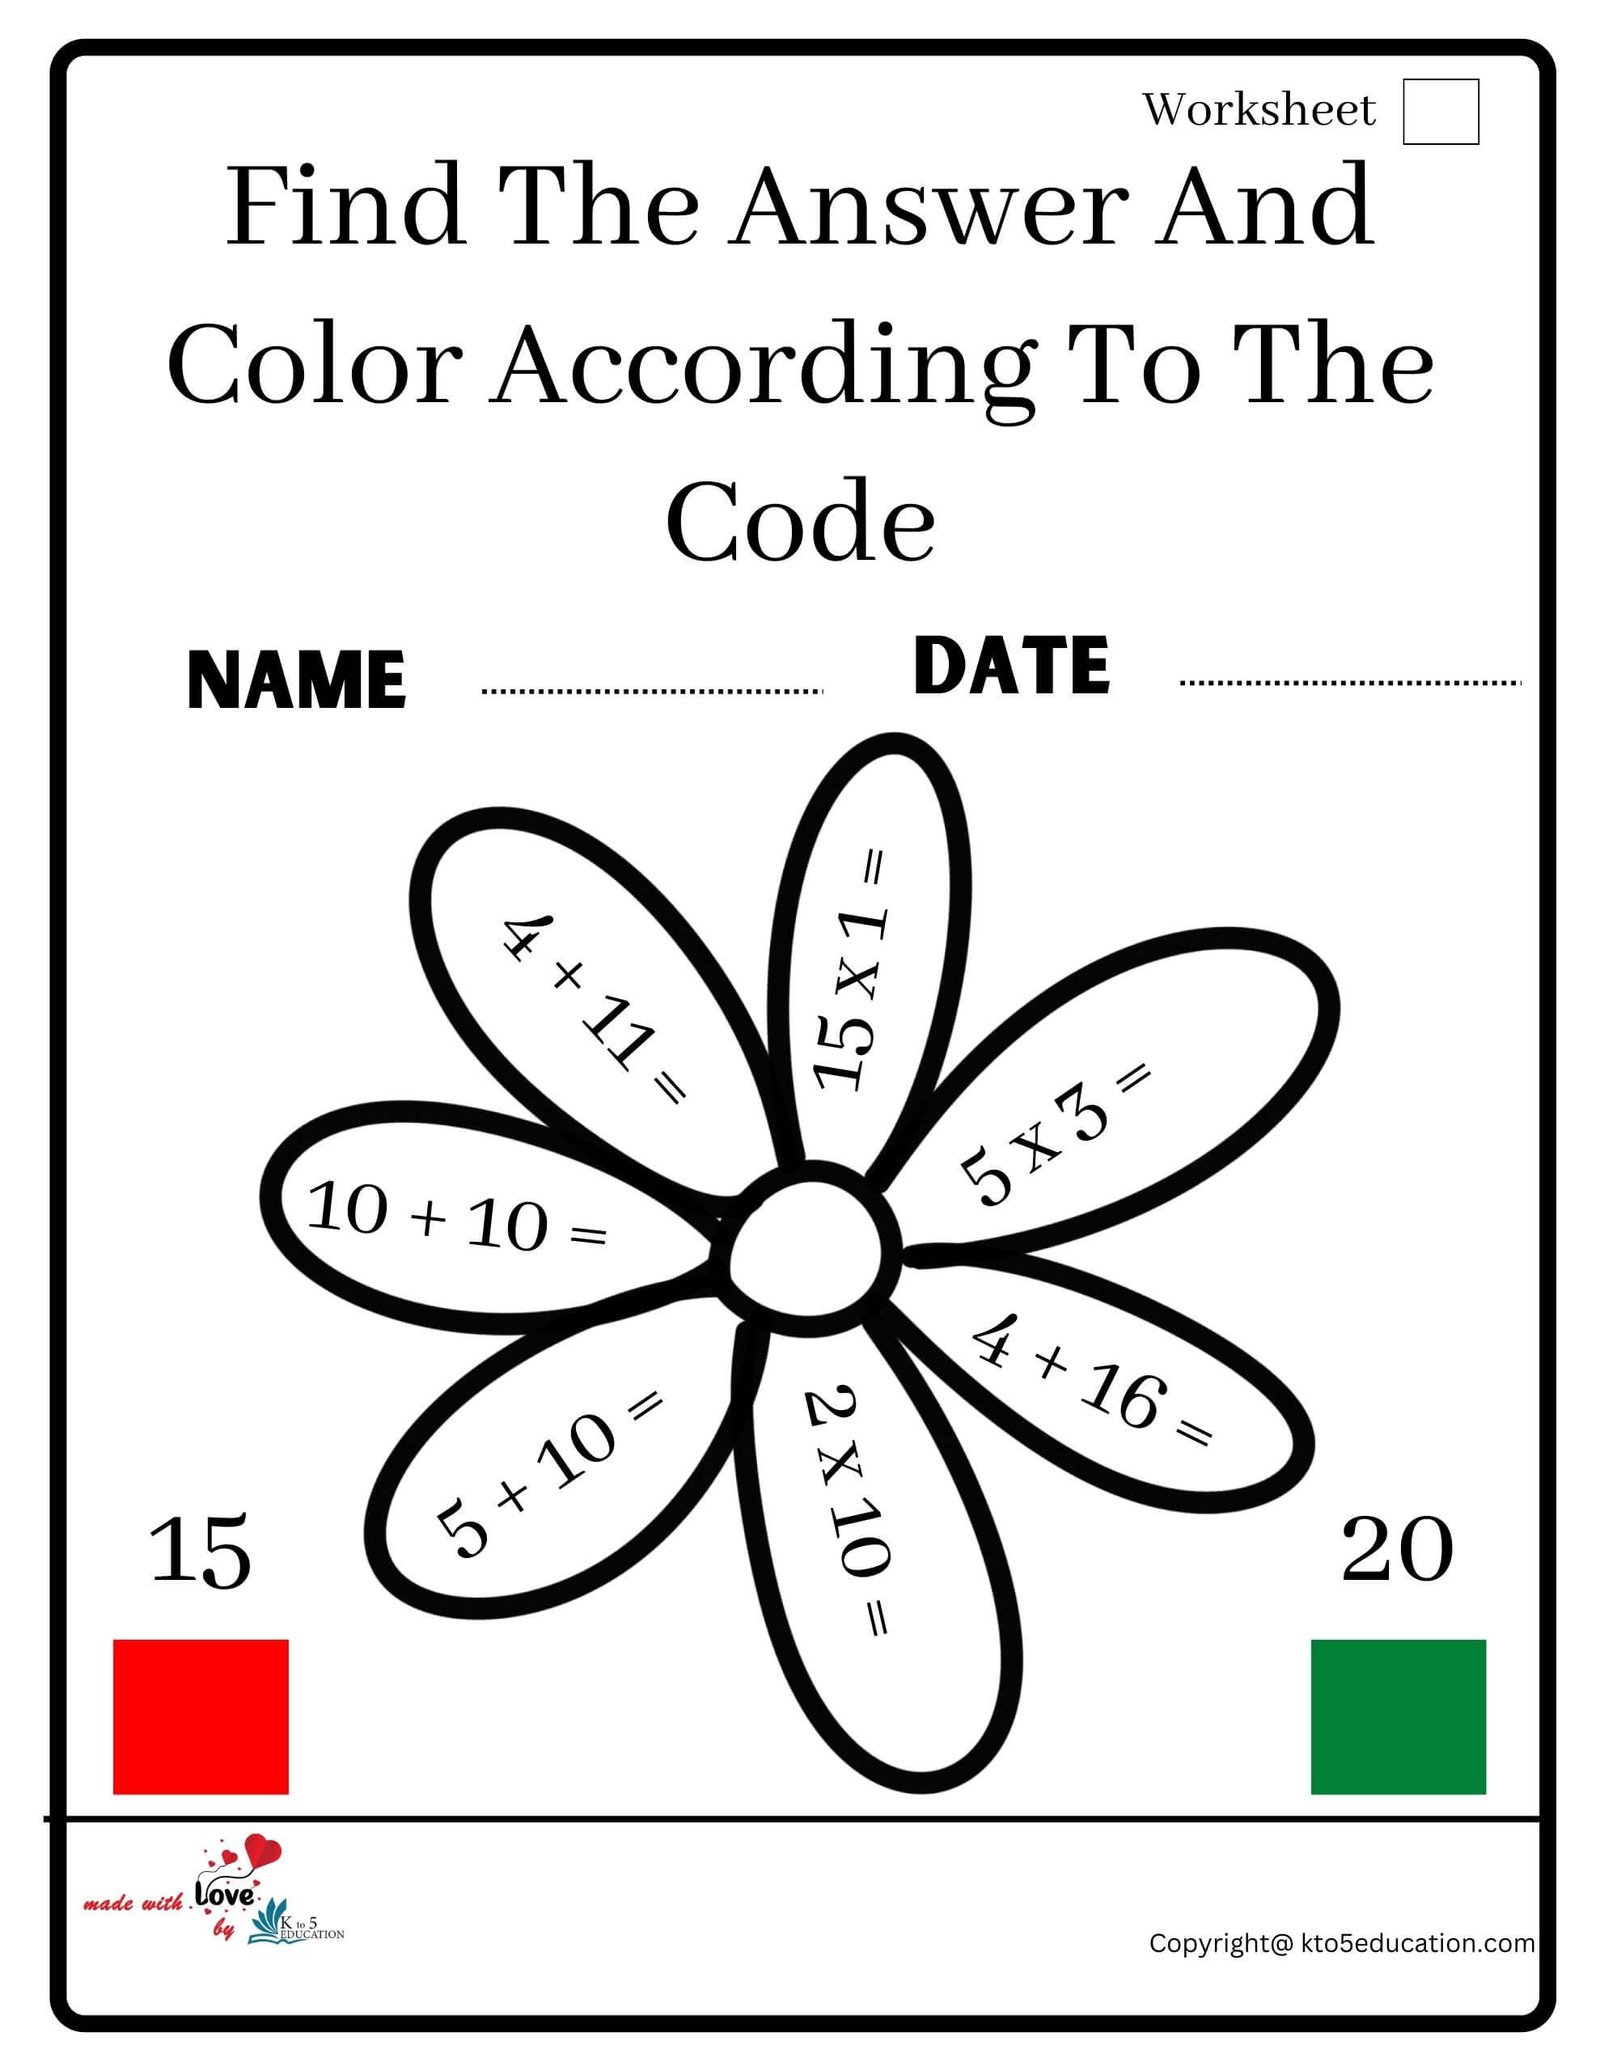 Find The Answer And Color According To The Code Worksheet